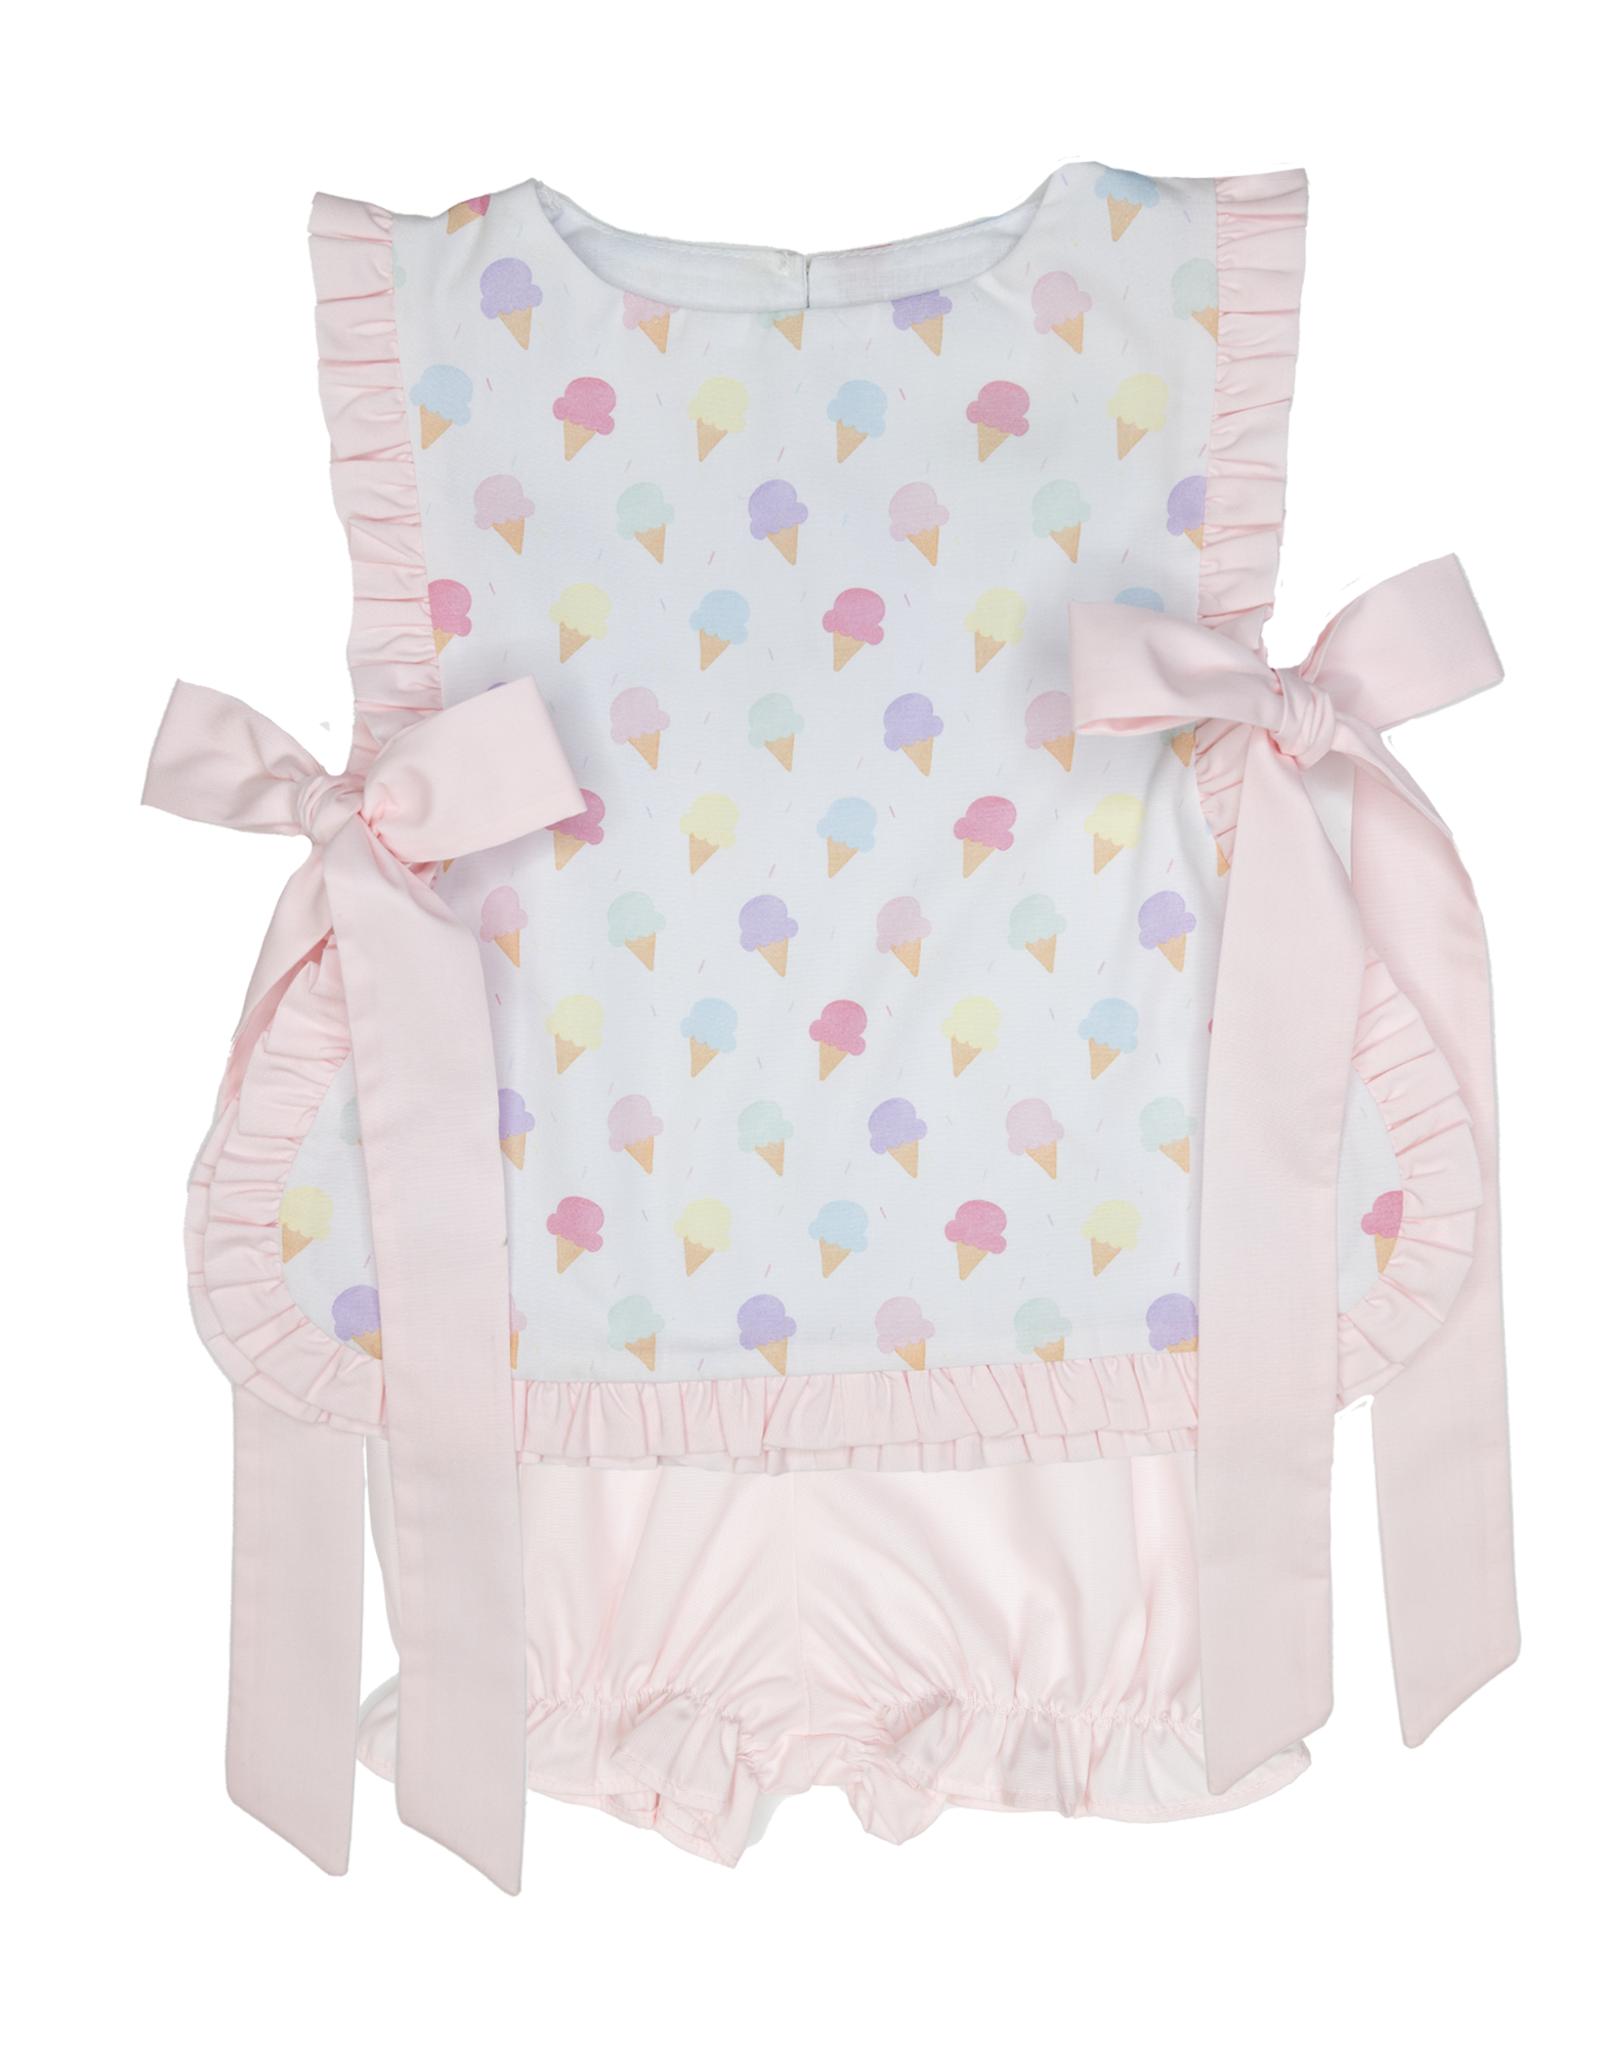 Mint Magnolia Bethany Bloomer Set Southend Scoops/Pink